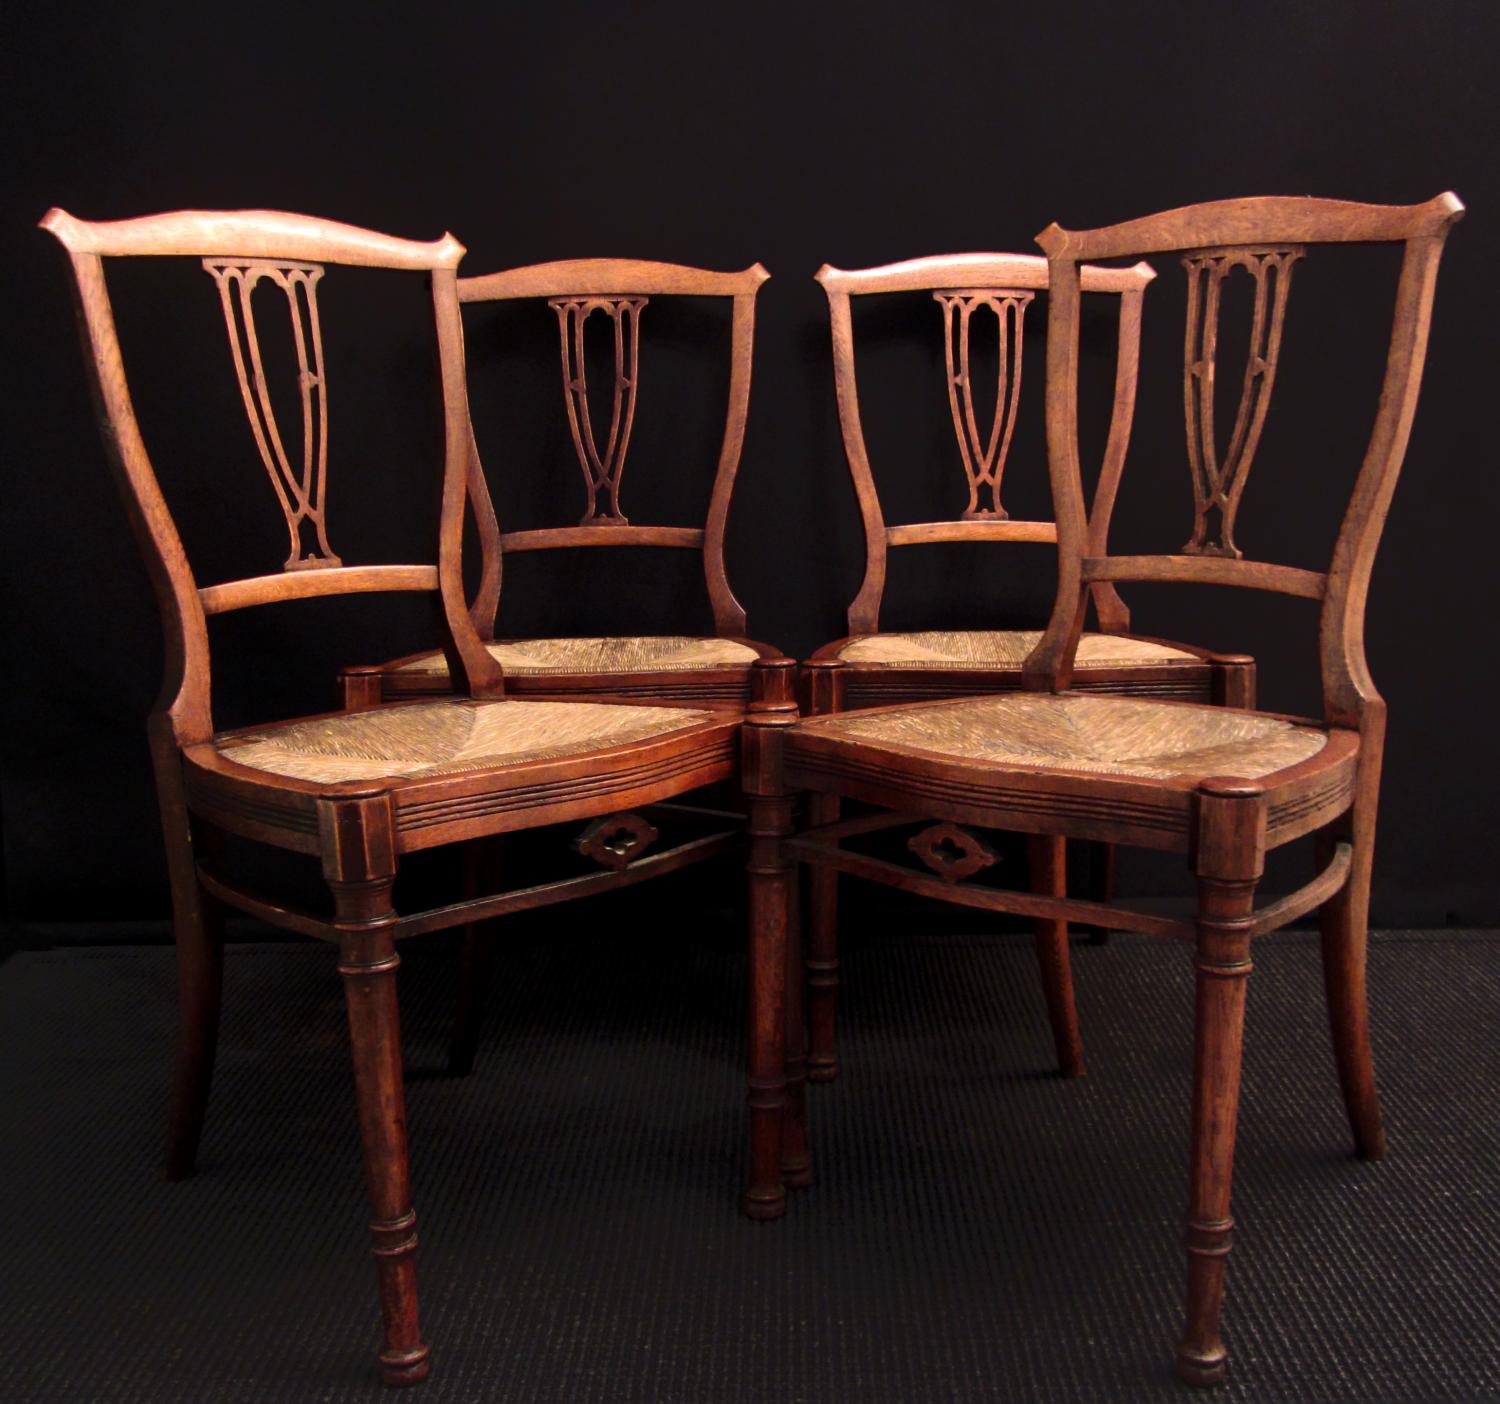 A set of four Arts and Crafts Style chairs